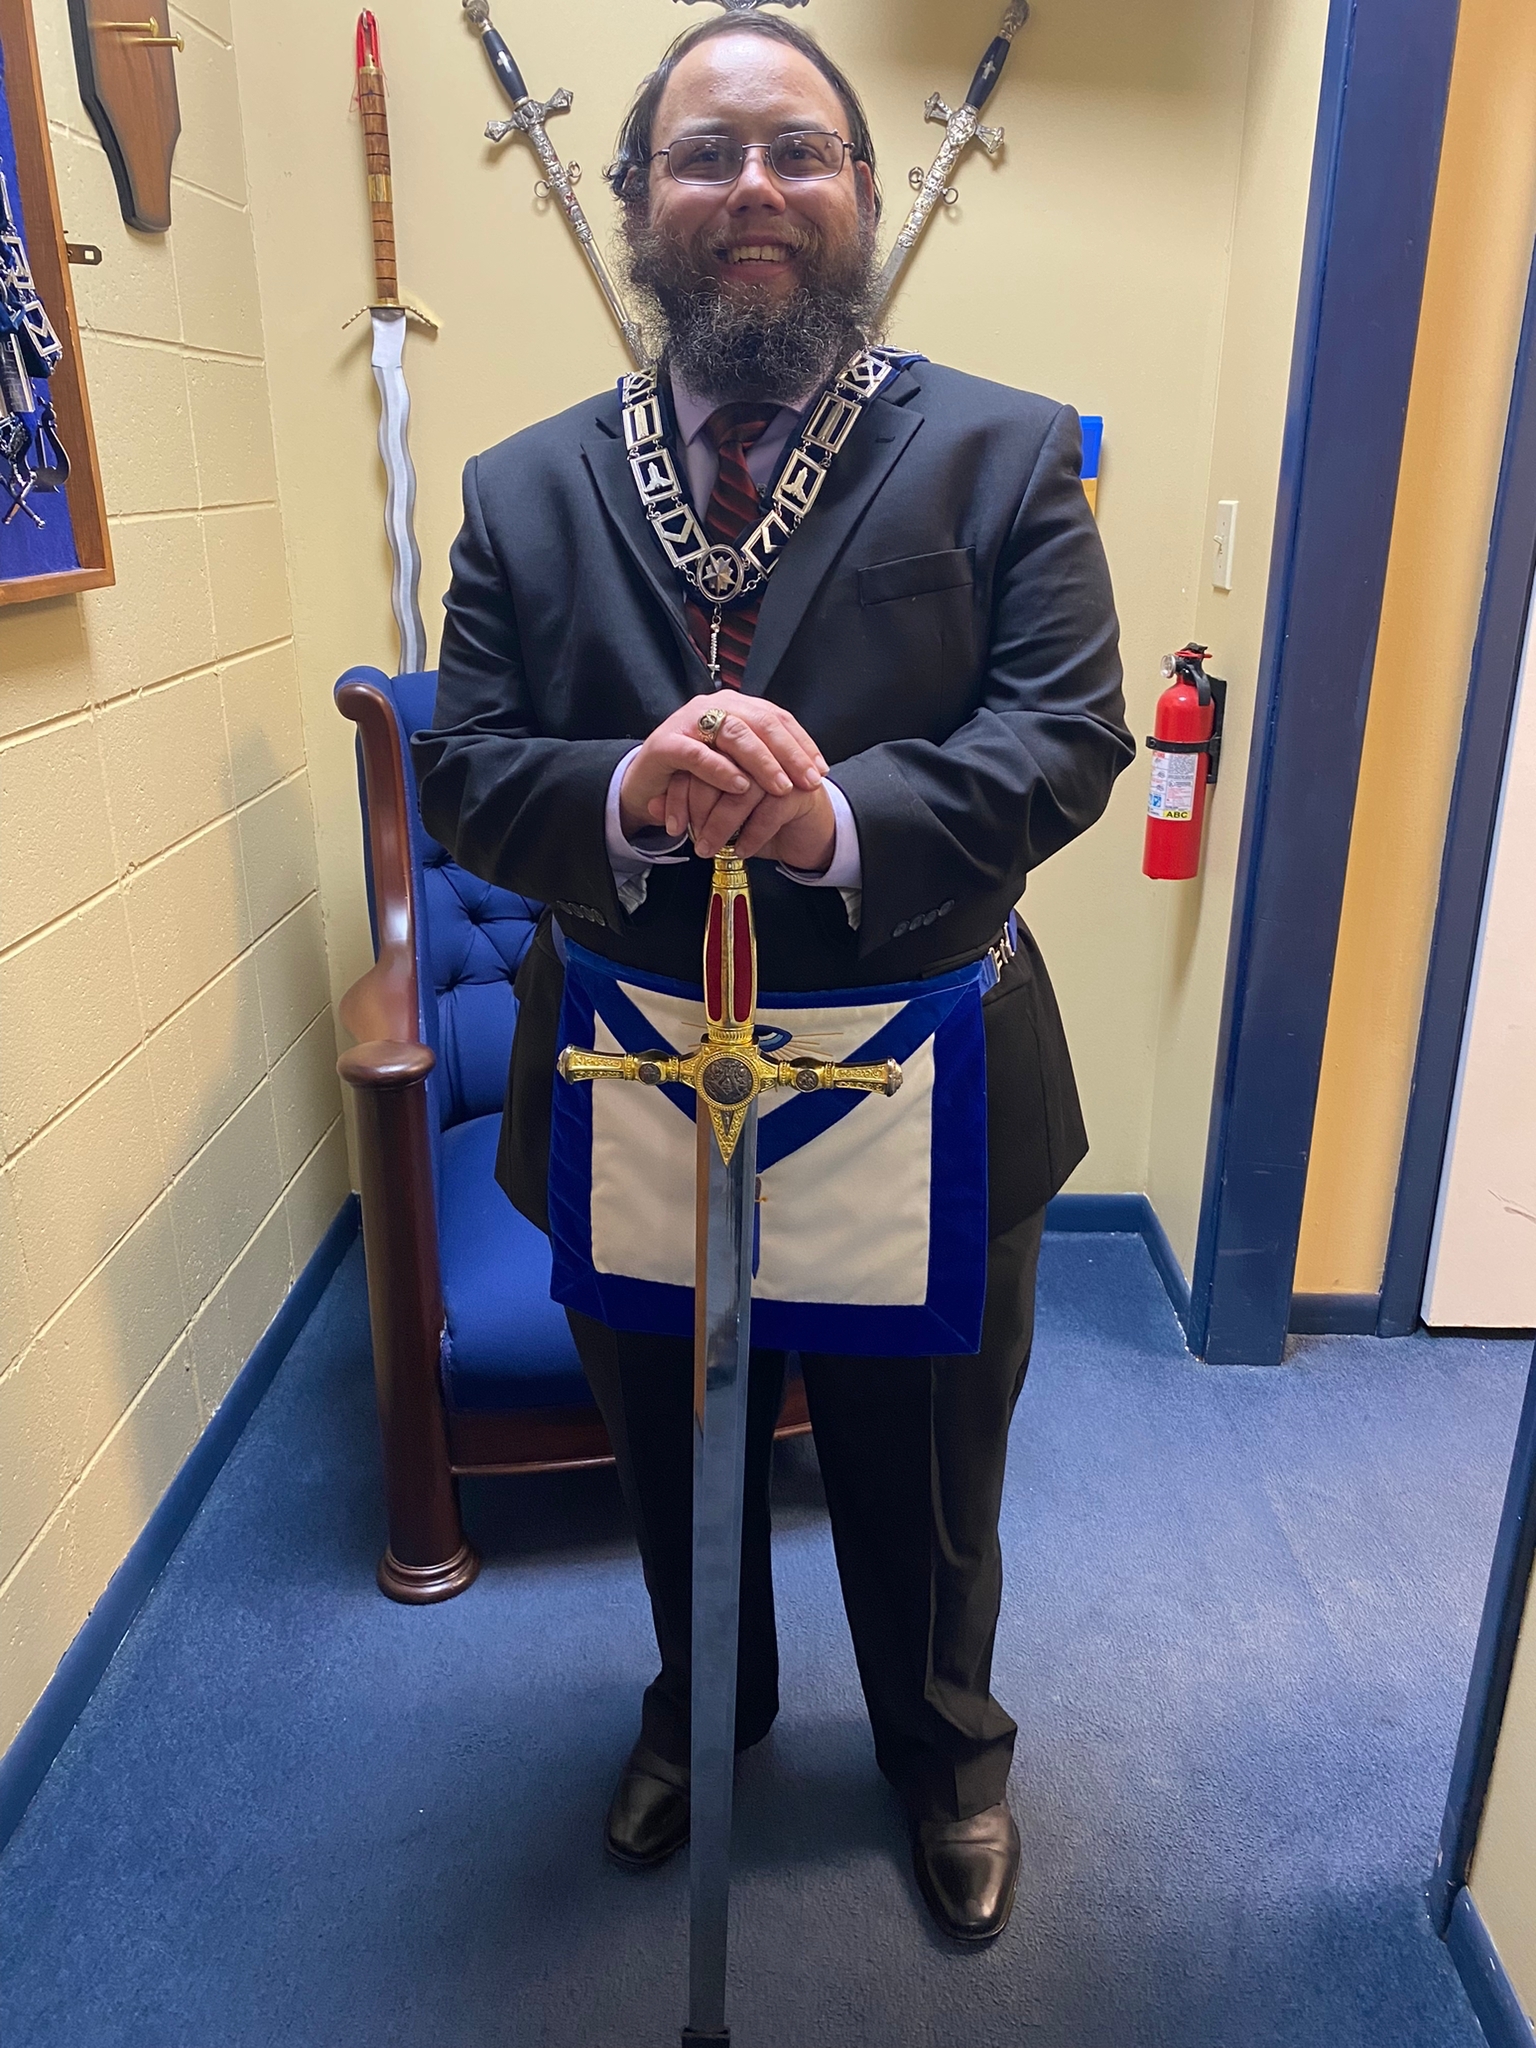 Tyler of Broad Ripple Lodge holding his sword